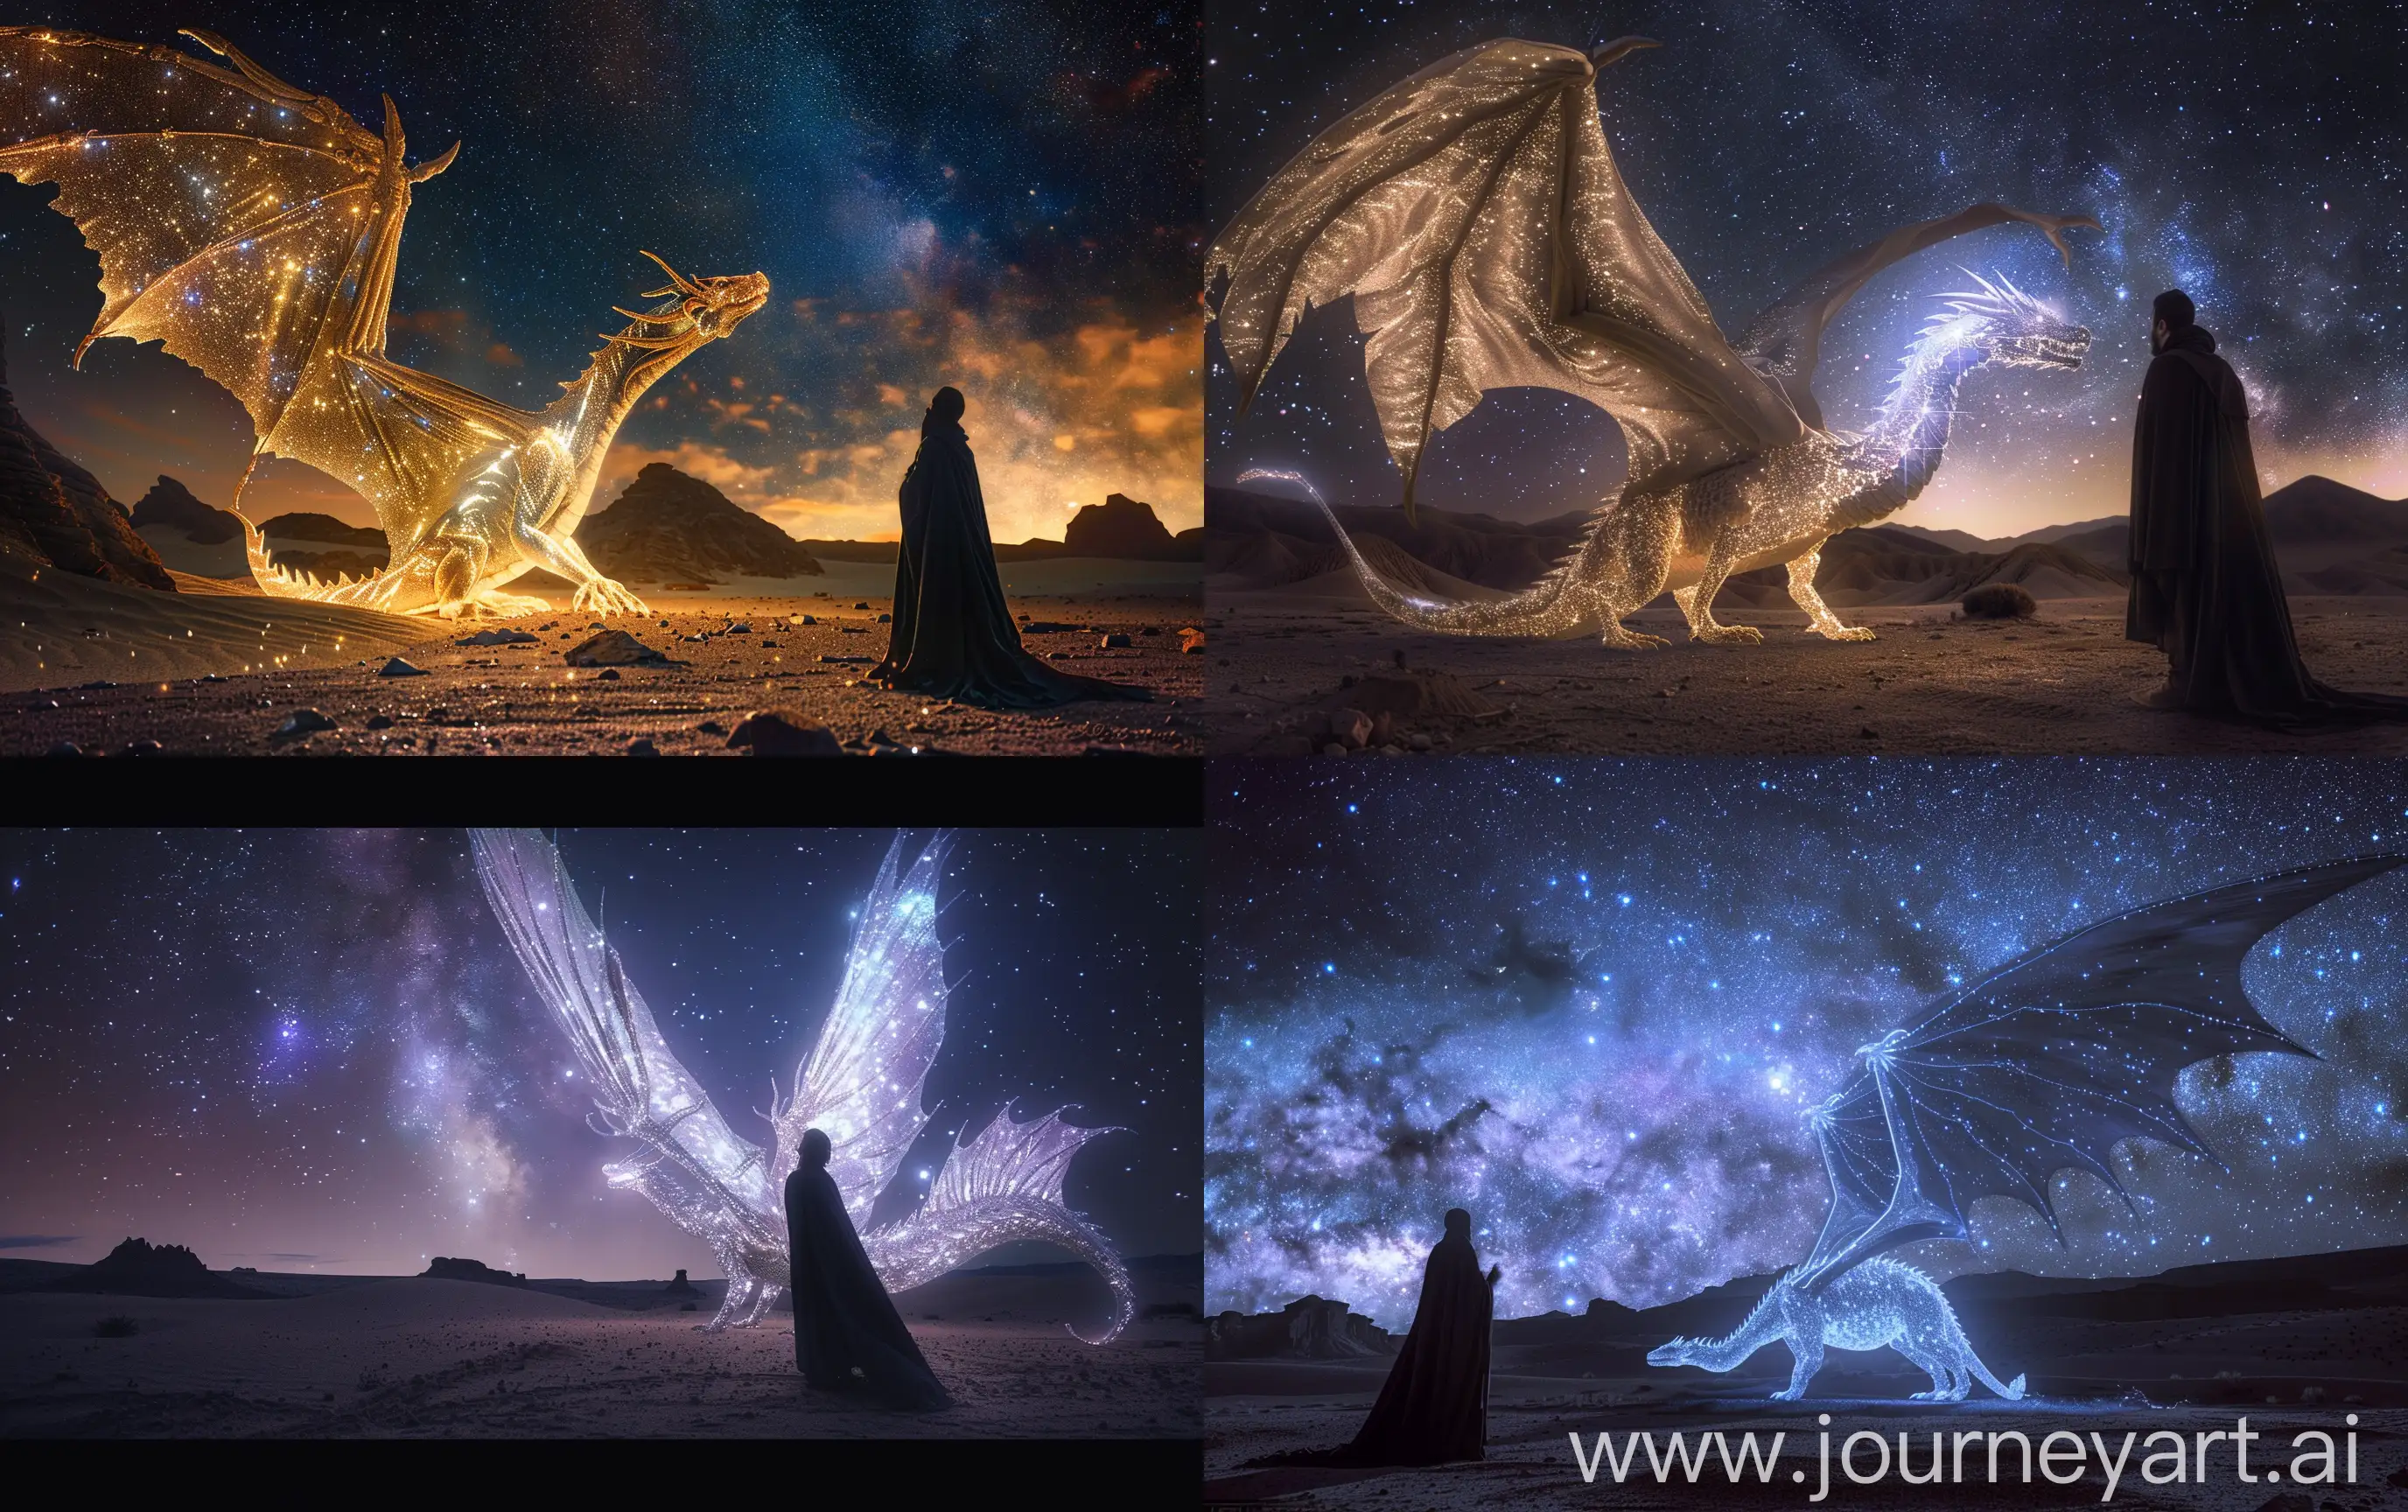 Enigmatic-Night-Encounter-Mystical-Dragon-and-Cloaked-Figure-in-Nebulalit-Desert